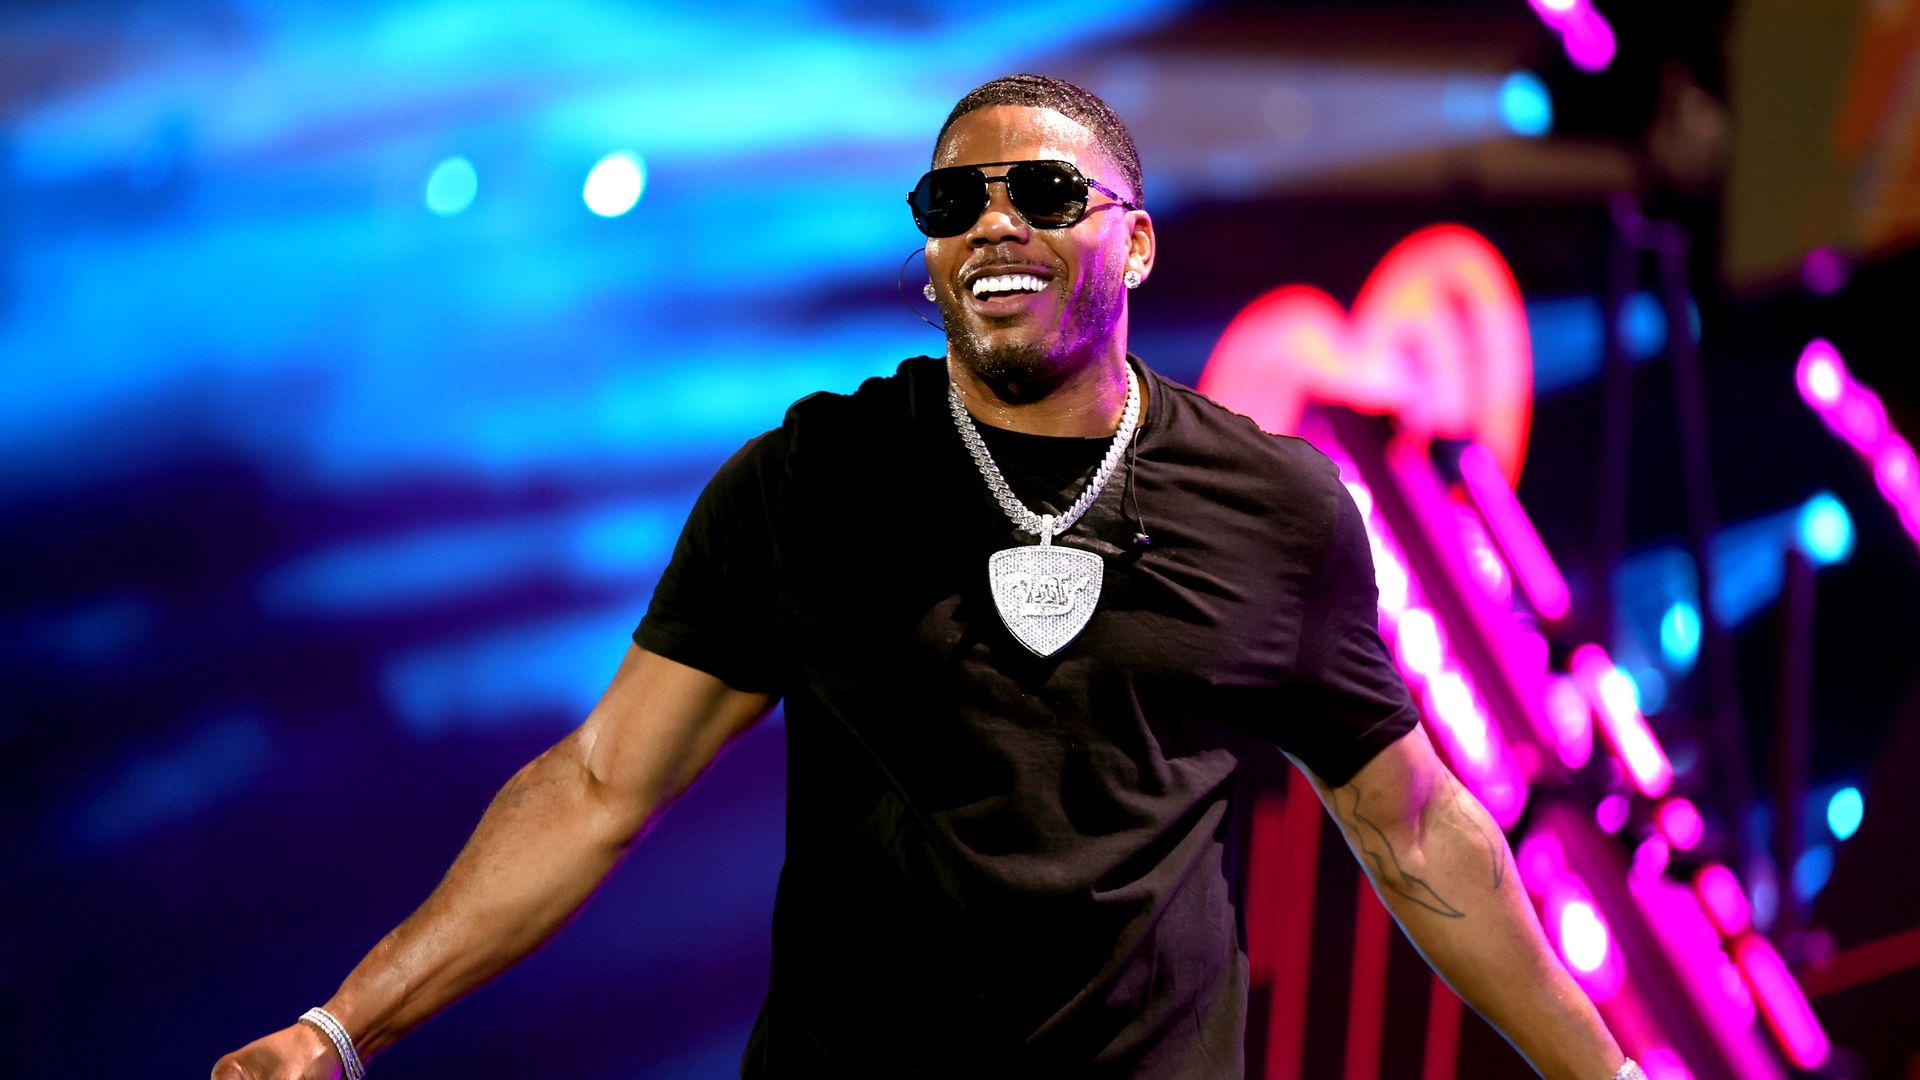 Rap star Nelly stands on stage with outstretched hands wearing sunglasses and a large necklace.